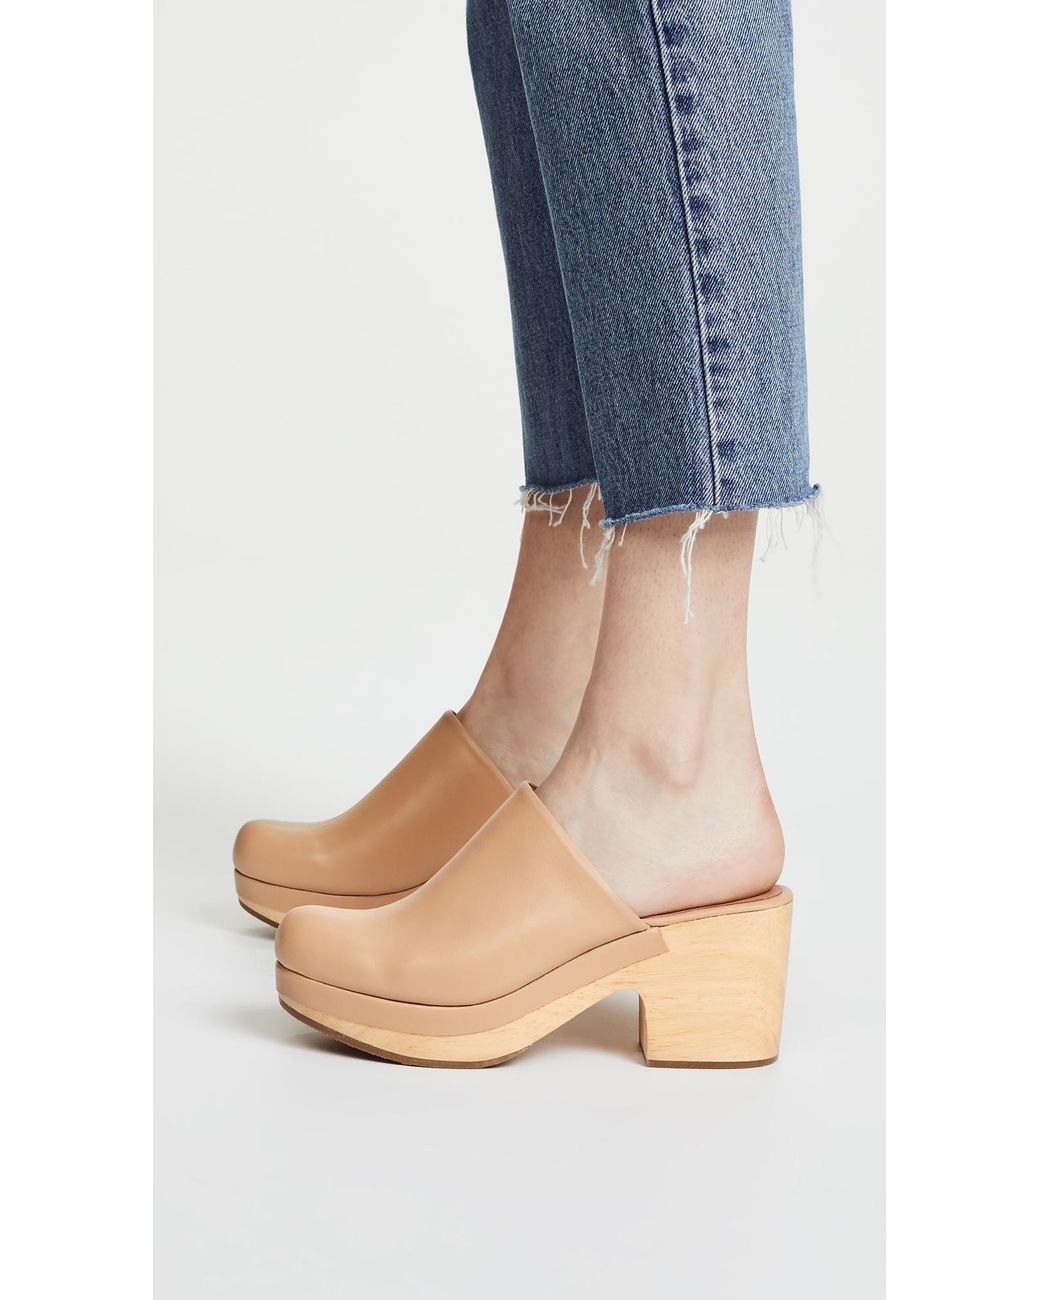 Rachel Comey Bose Clogs in Natural | Lyst